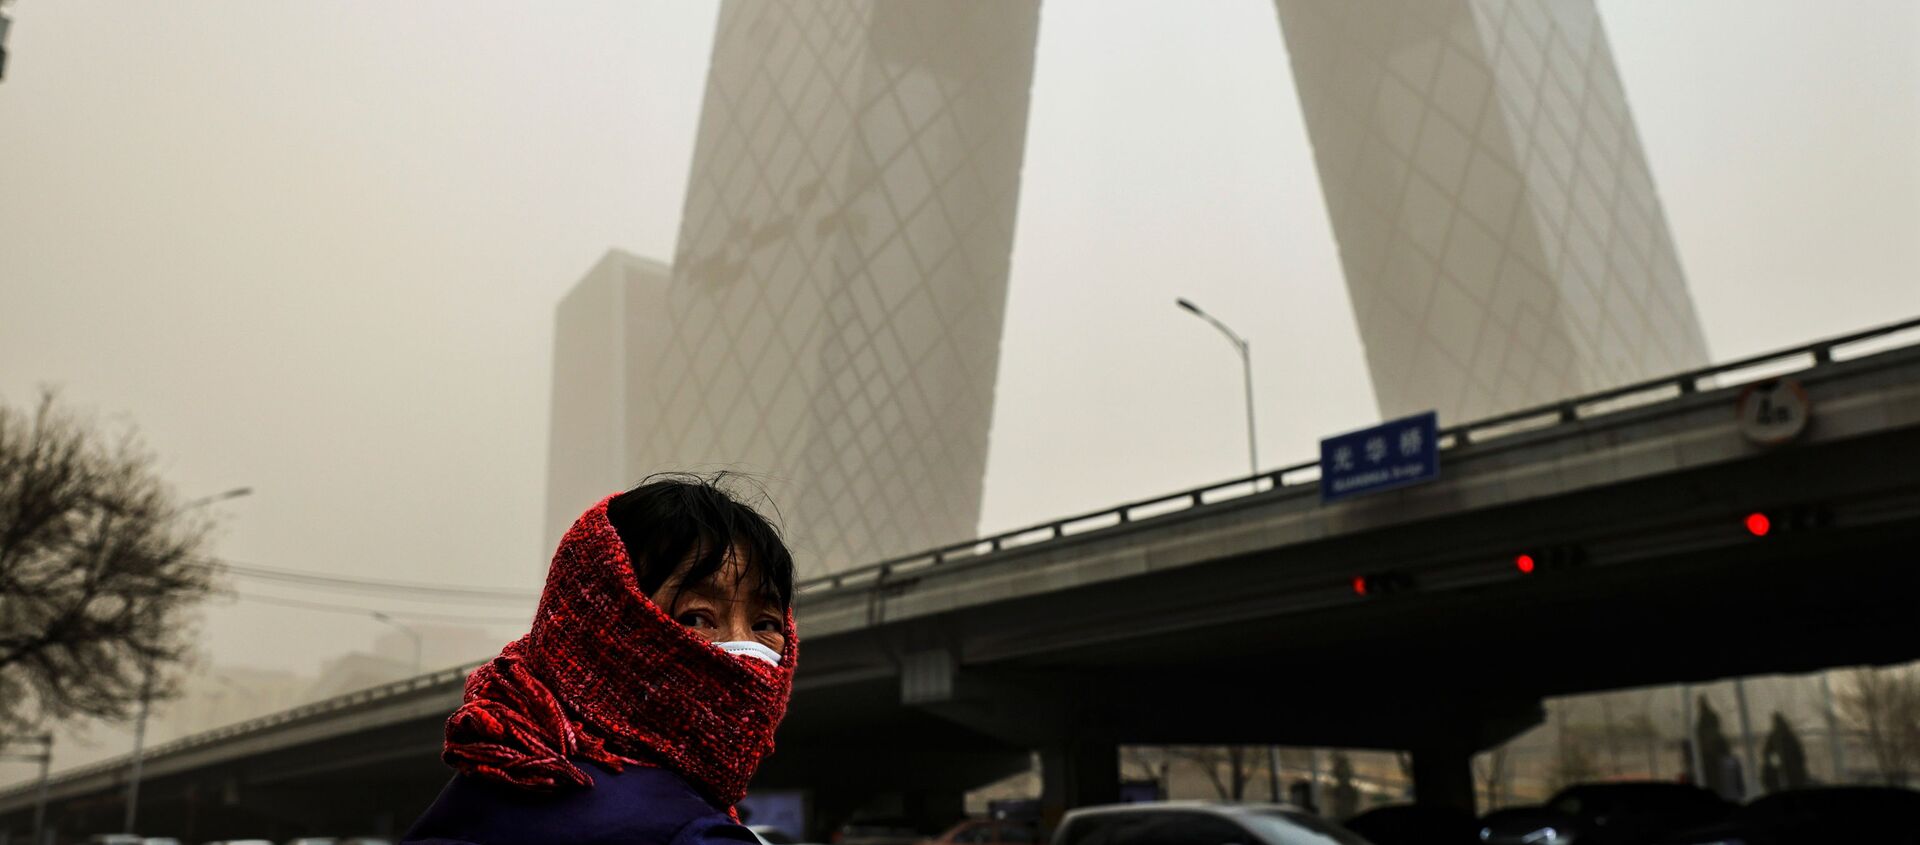 A woman wearing a head covering is seen in front of the headquarters of China's state media broadcaster CCTV that is shrouded in a haze after a sandstorm in the Central Business District of Beijing, China. - Sputnik International, 1920, 15.03.2021